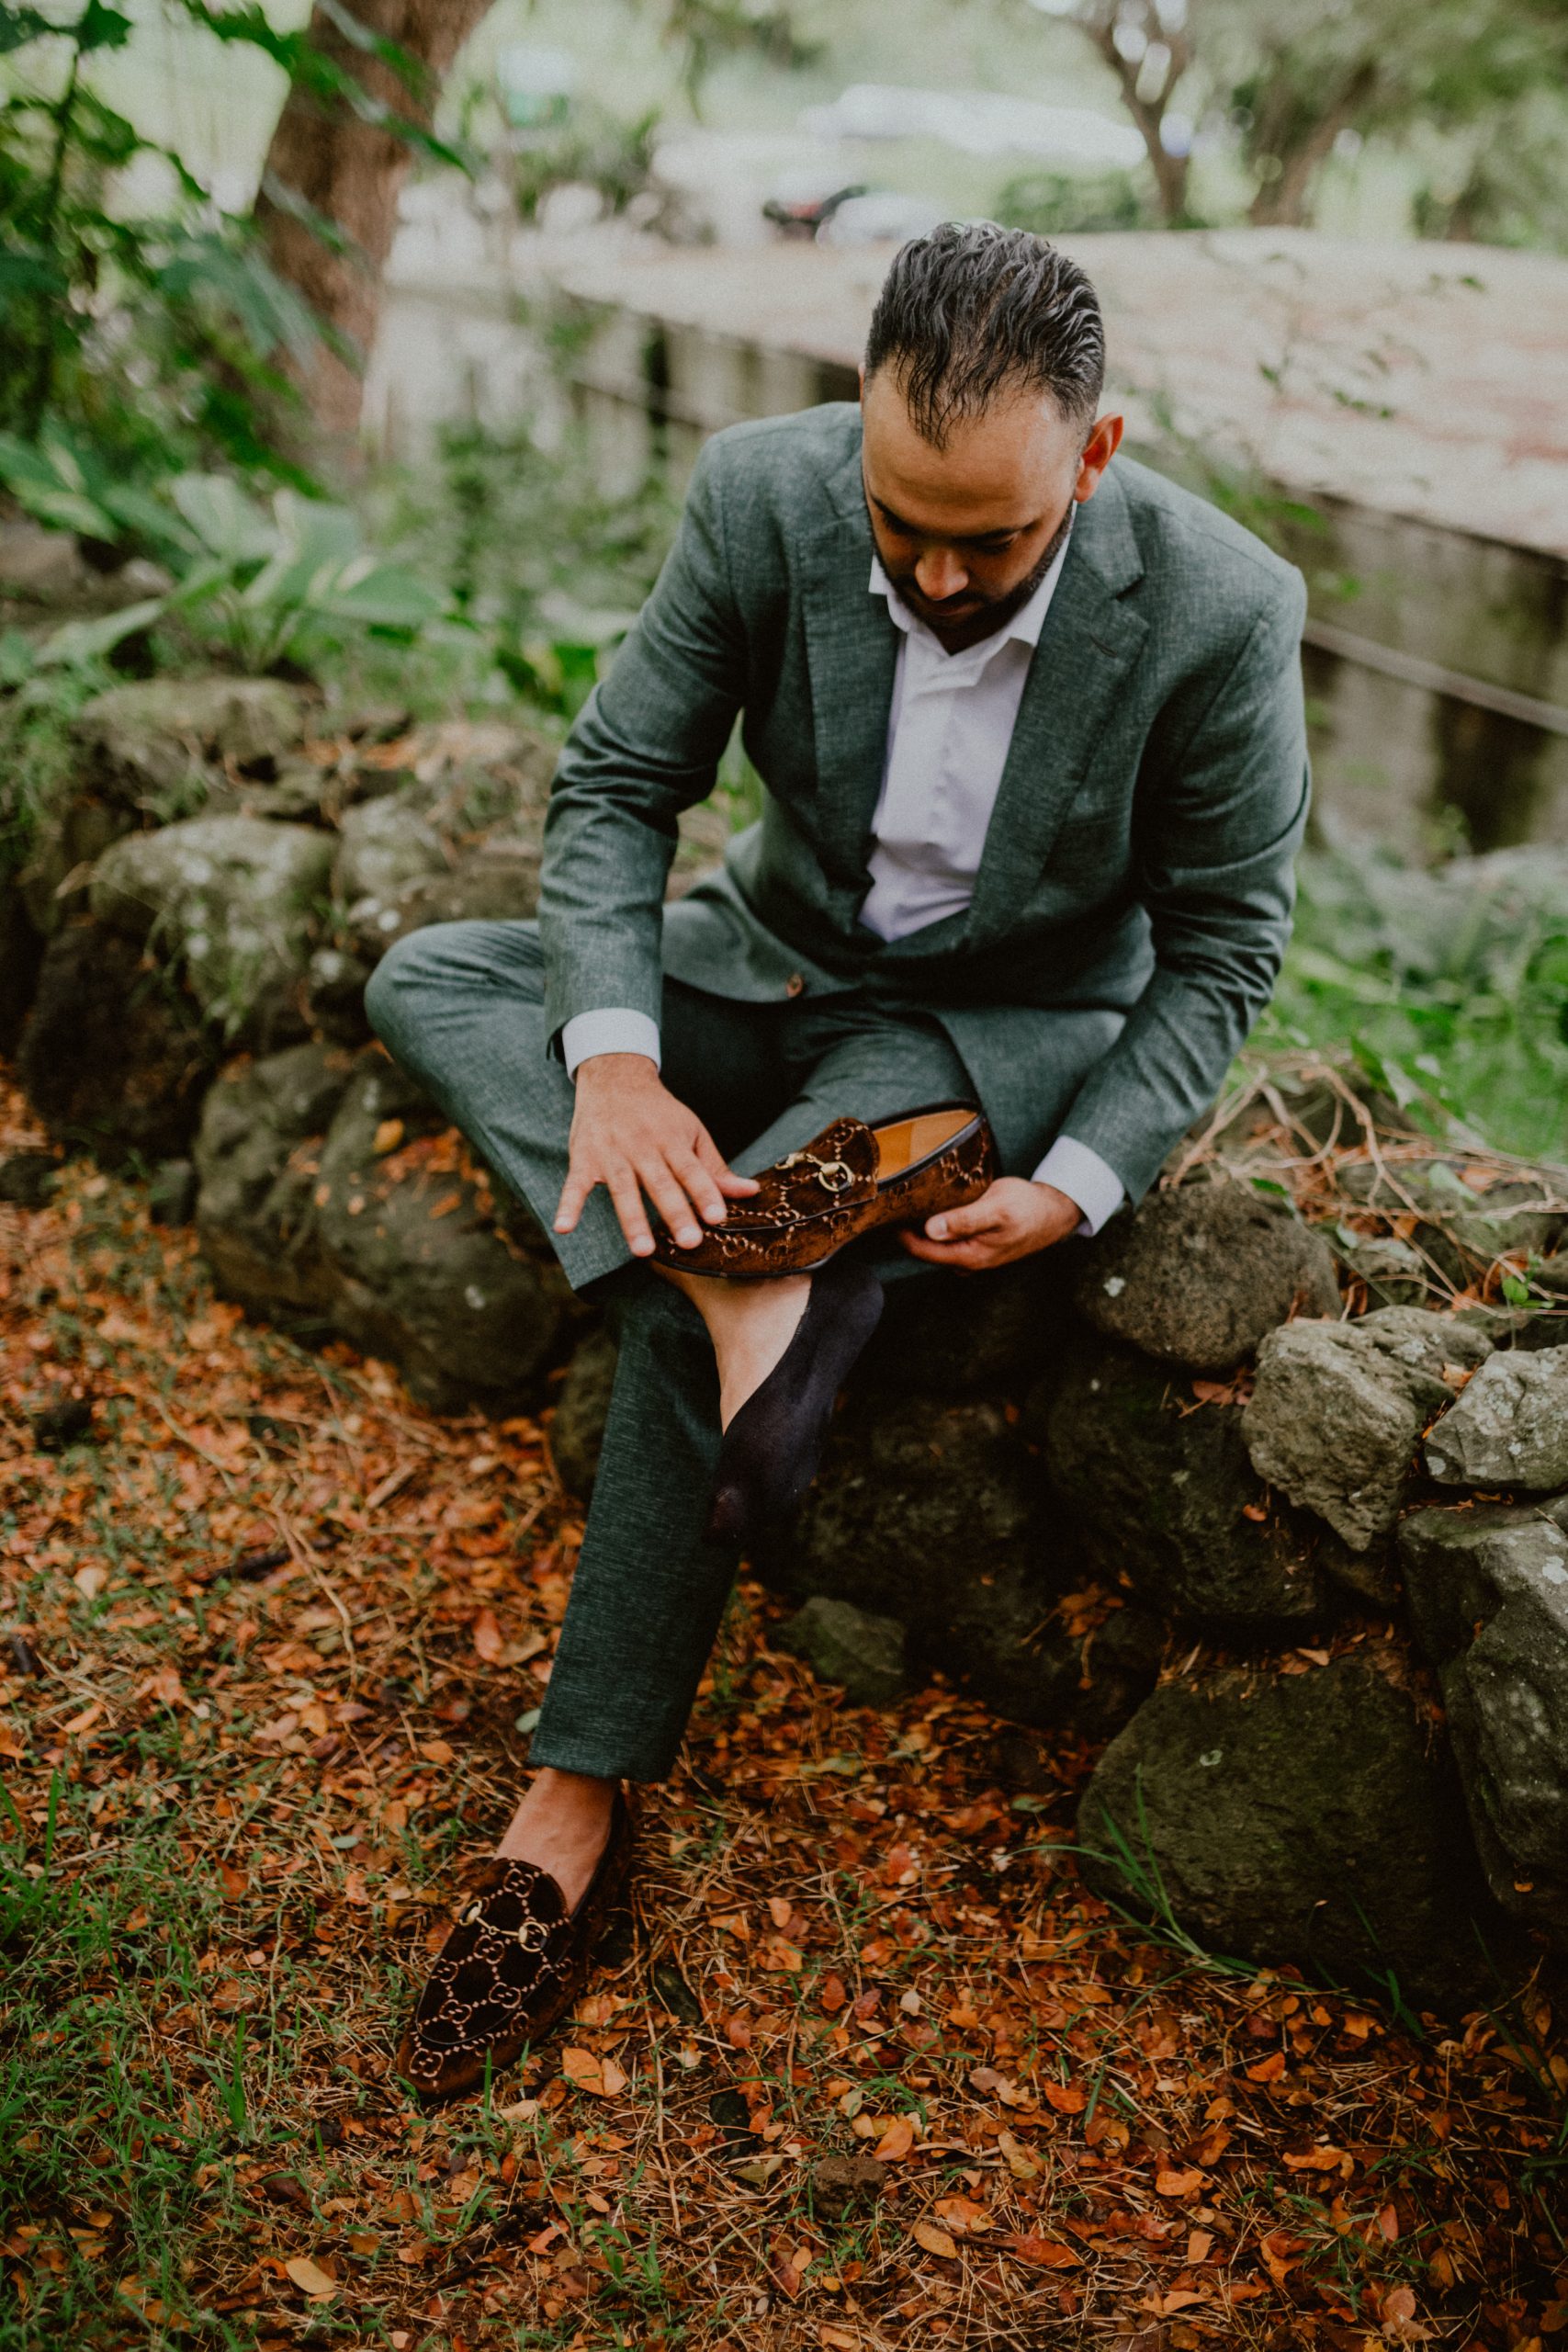 Groom adjusts his Gucci loafers pre-wedding ceremony while wearing his grey linen suit and white button down shirt | Oahu Wedding Photographer, Oahu Elopement Photographer, Destination Wedding Photographer, Destination Elopement Photographer, Newlywed moments ideas, Newlywed Photography inspiration, Hawaii Elopement ideas | chelseaabril.com